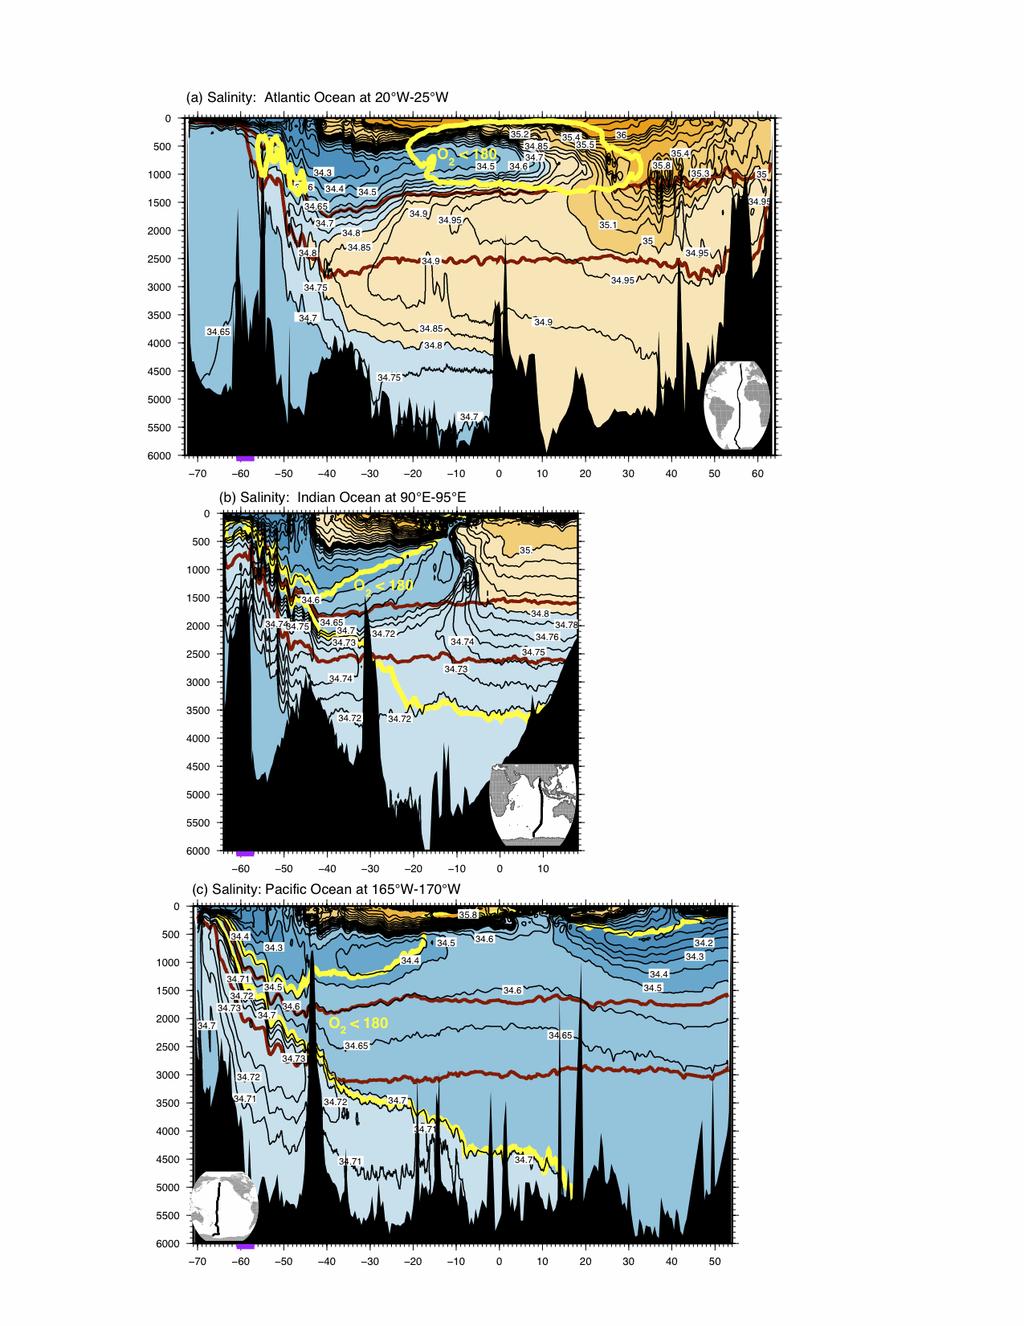 Figure 2. Salinity for the (a) Atlantic (20-25 W), (b) Indian (80-95 E), and (c) Pacific (165-170 W).